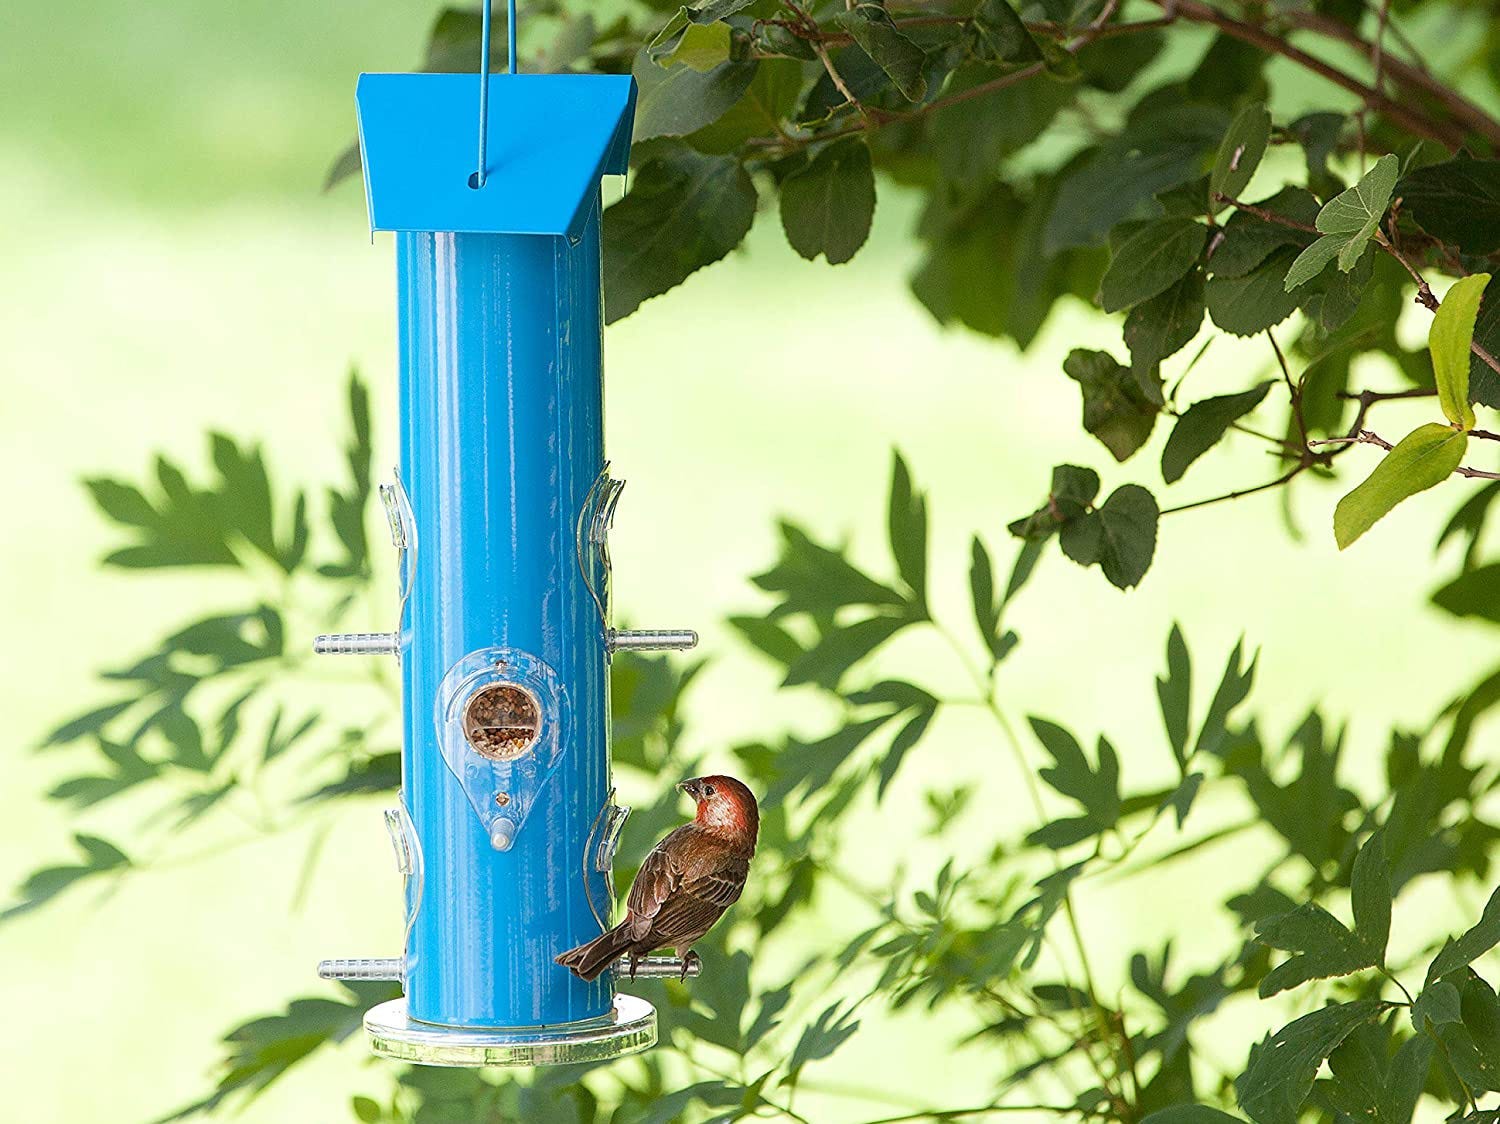 bird feeding from blue tube feeder made by Perky Pet, one of the Best bird feeders in 2021